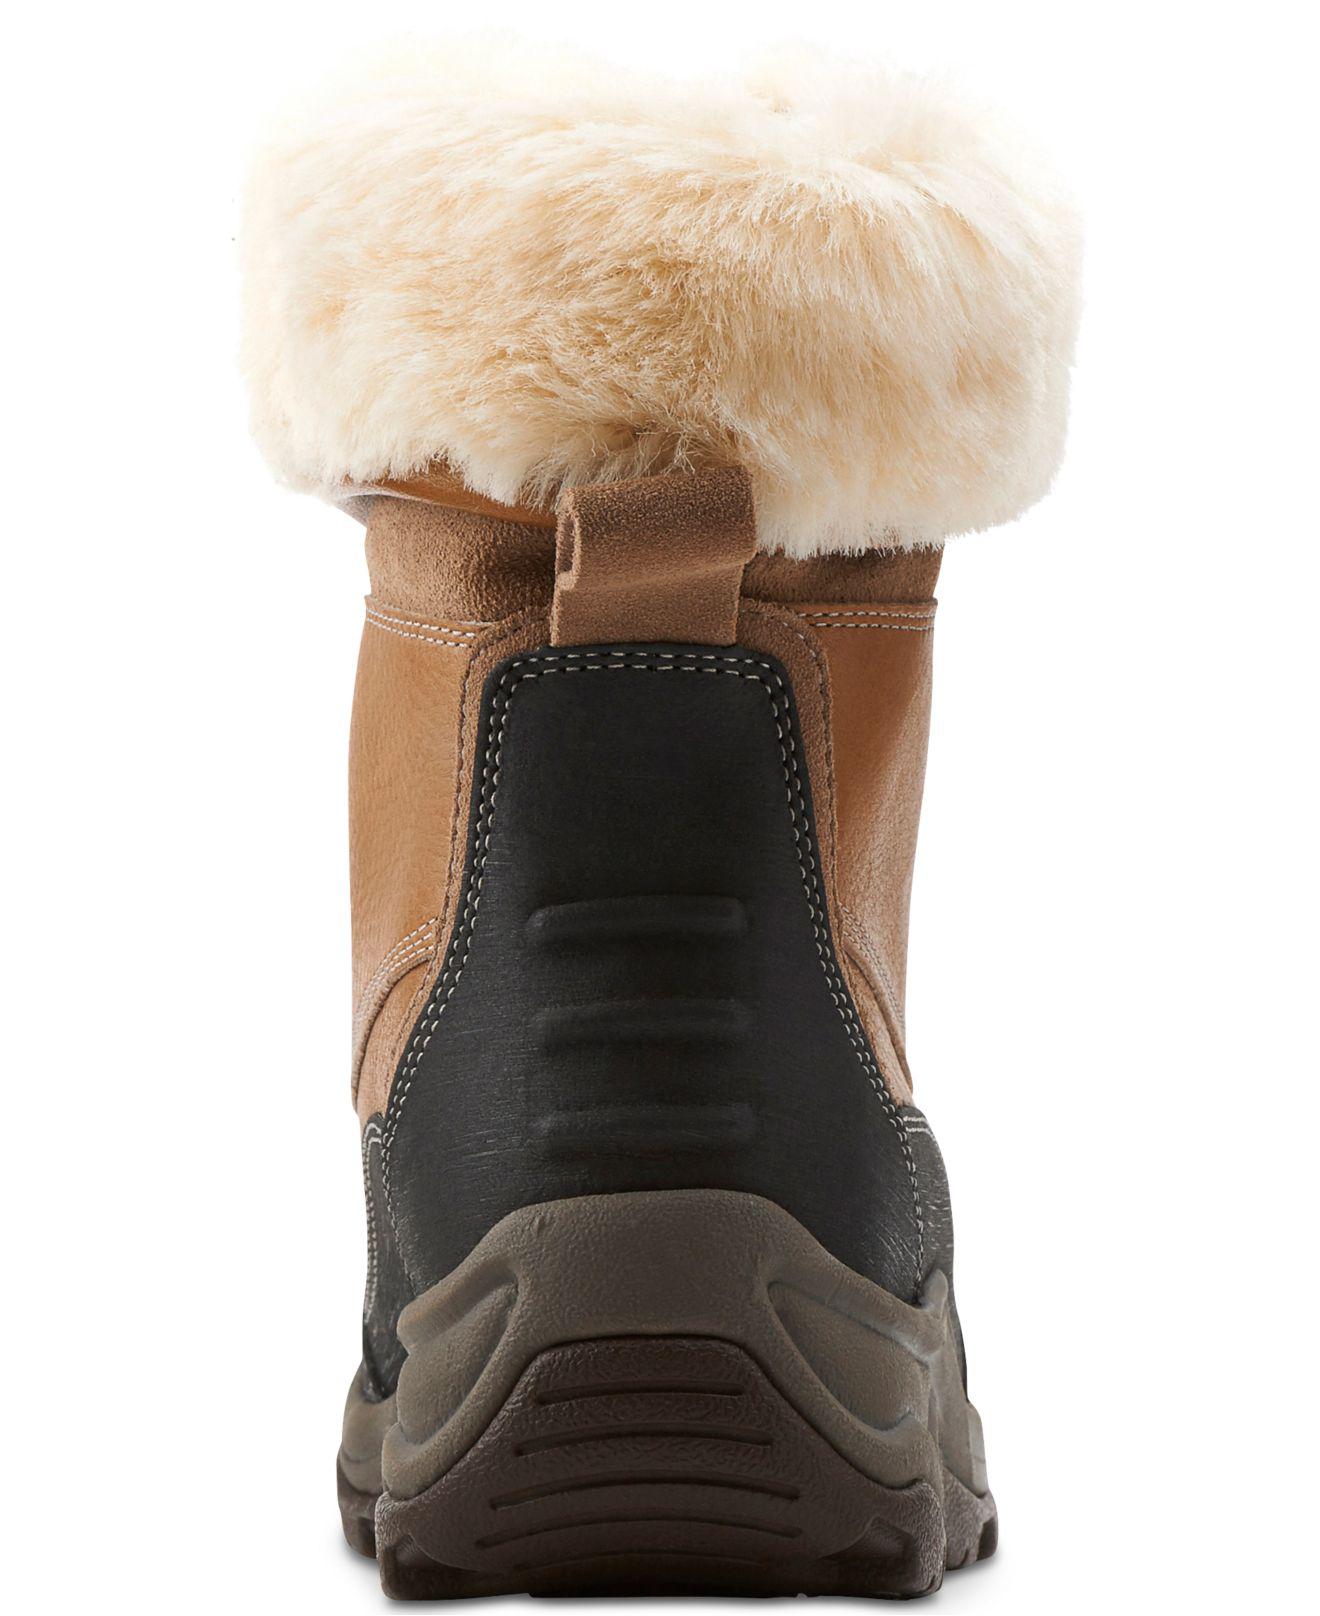 Clarks Leather Arctic Venture Faux-fur Cold Weather Boots in Camel Leather (Natural) - Lyst